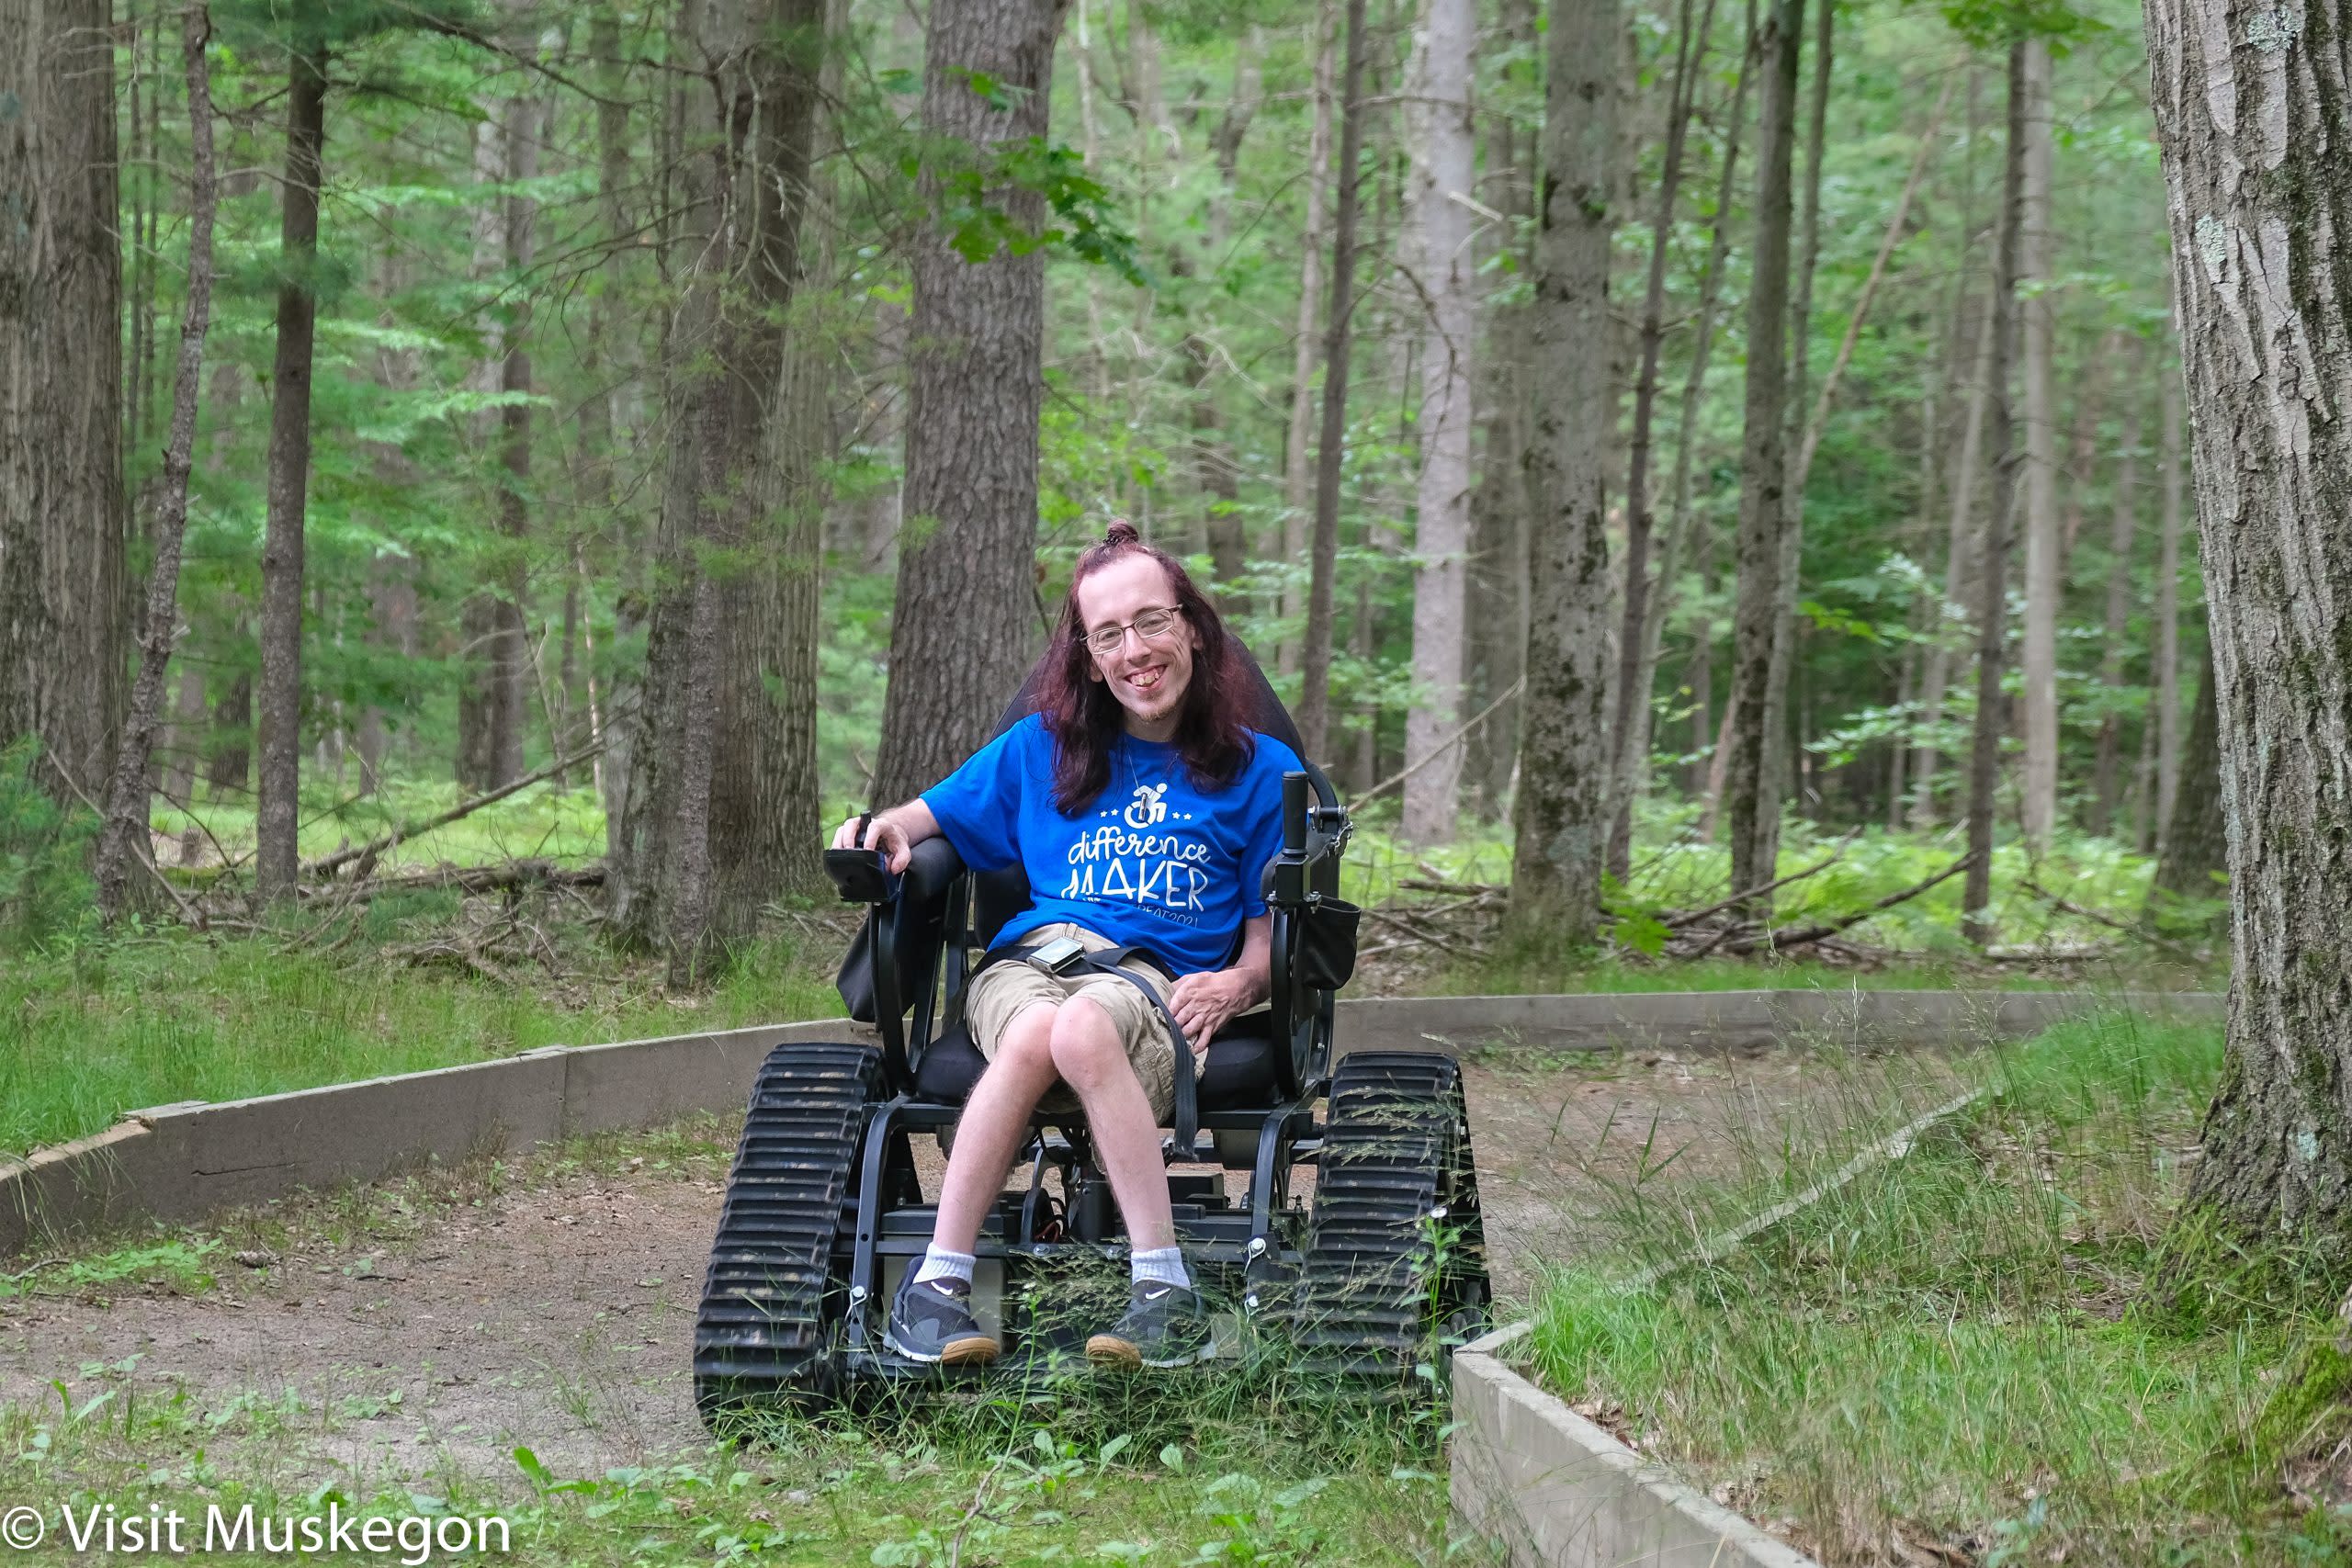 Smiling young man travels hiking path in TrackChair at Muskegon Luge Adventure Sports Park. He is surrounded by trees and natural flora. 